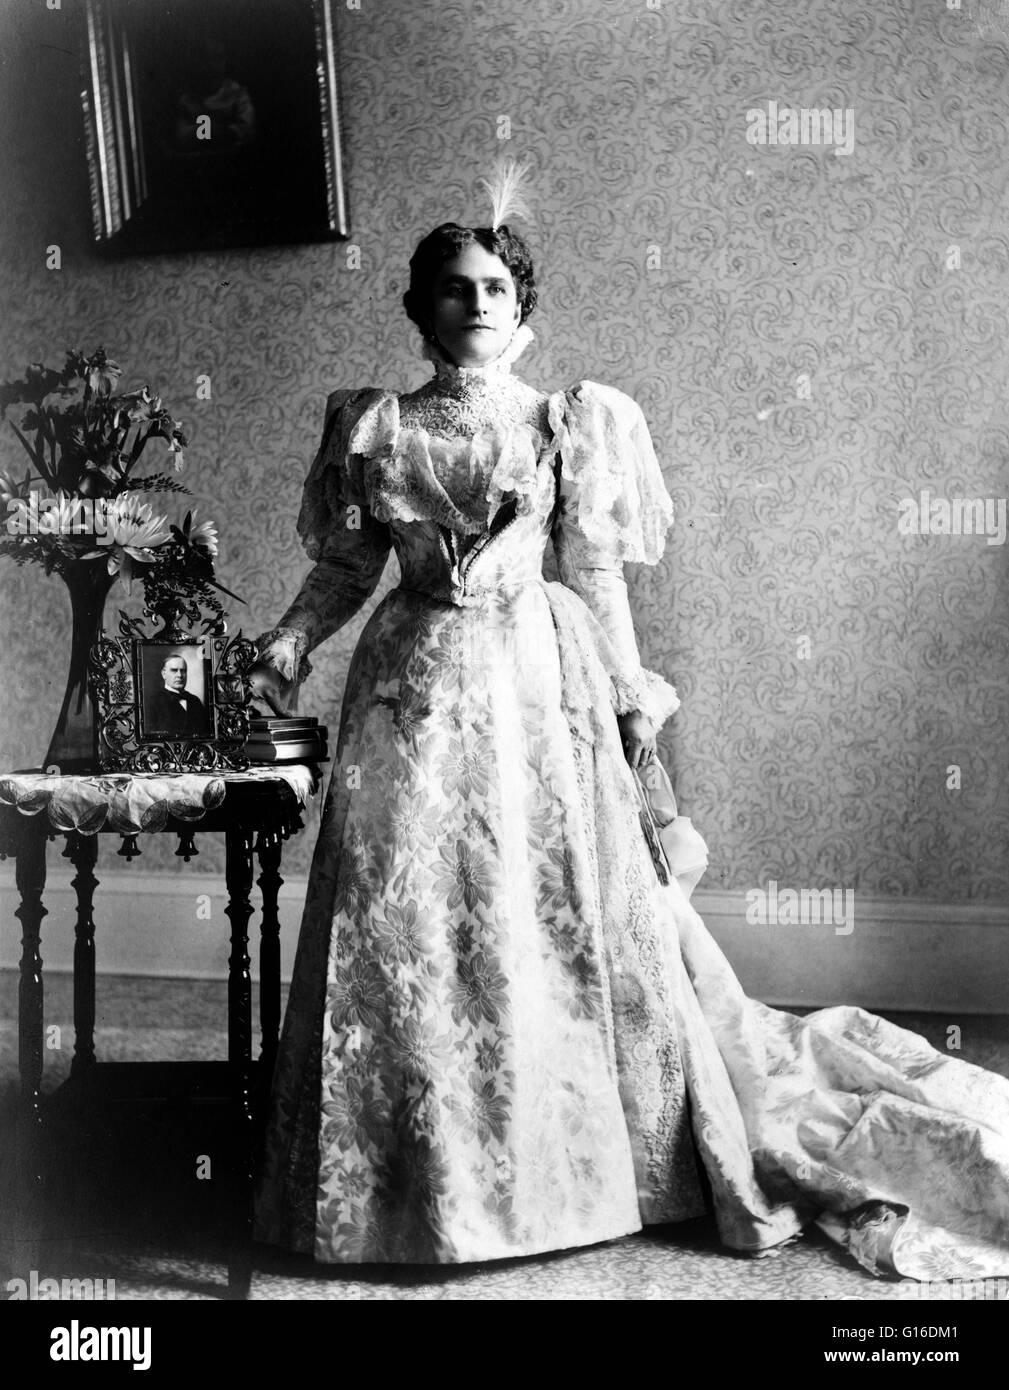 Ida Saxton McKinley (June 8, 1847 - May 26, 1907), wife of William McKinley, was First Lady of the United States from 1897 to 1901. Ida was refined, charming, and strikingly attractive. While single, she worked for a time as a cashier in her father's bank Stock Photo